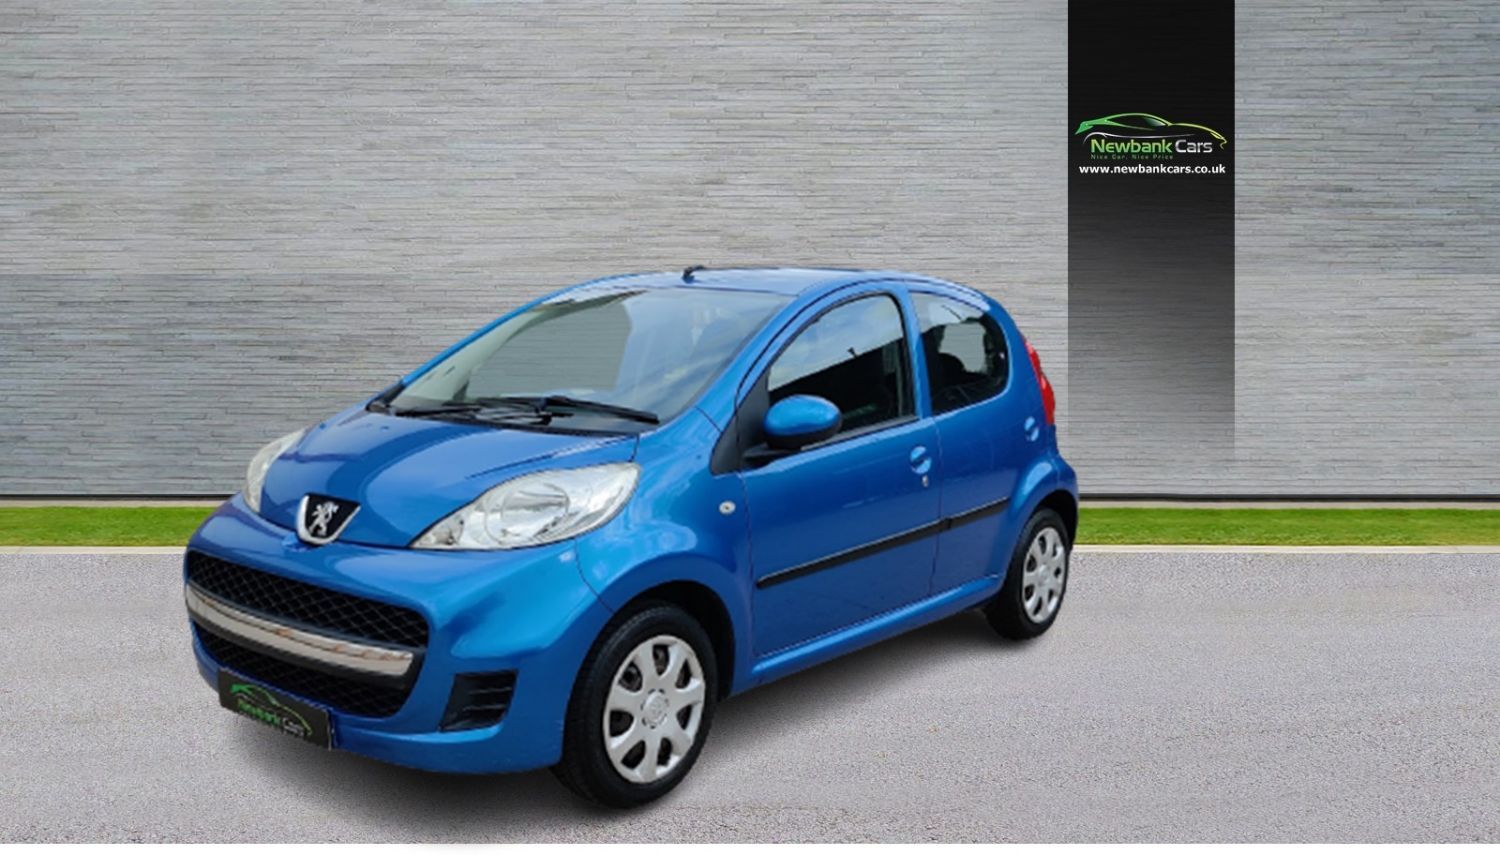 Used PEUGEOT 107 in Rochdale, Lancashire